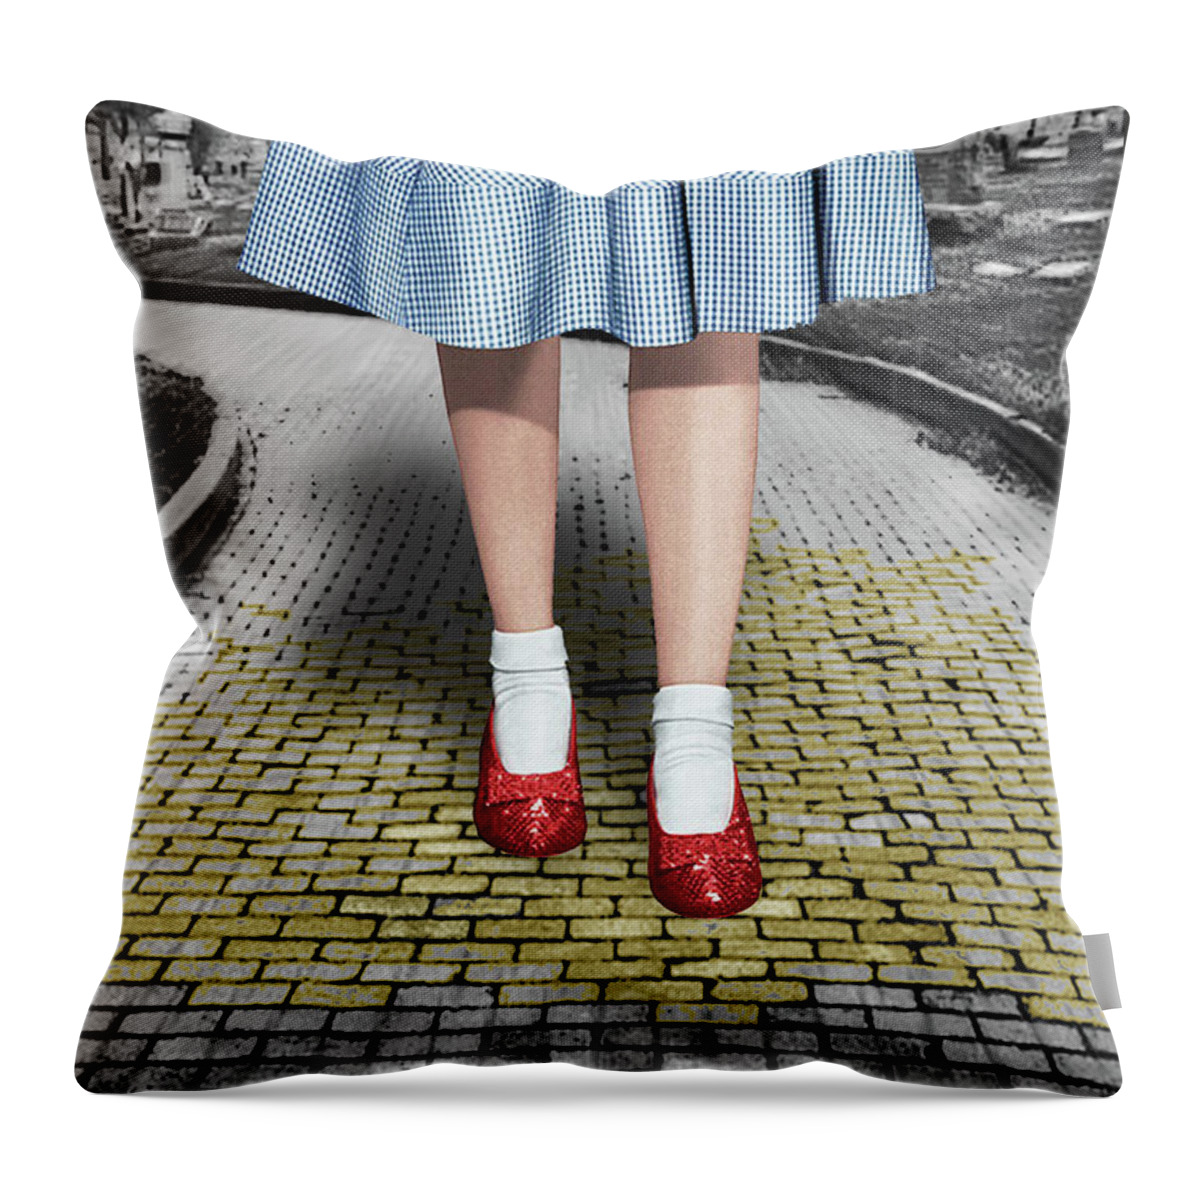 The Wizard Of Oz Throw Pillow featuring the painting Creepy Dorothy In The Wizard of Oz 2 by Tony Rubino